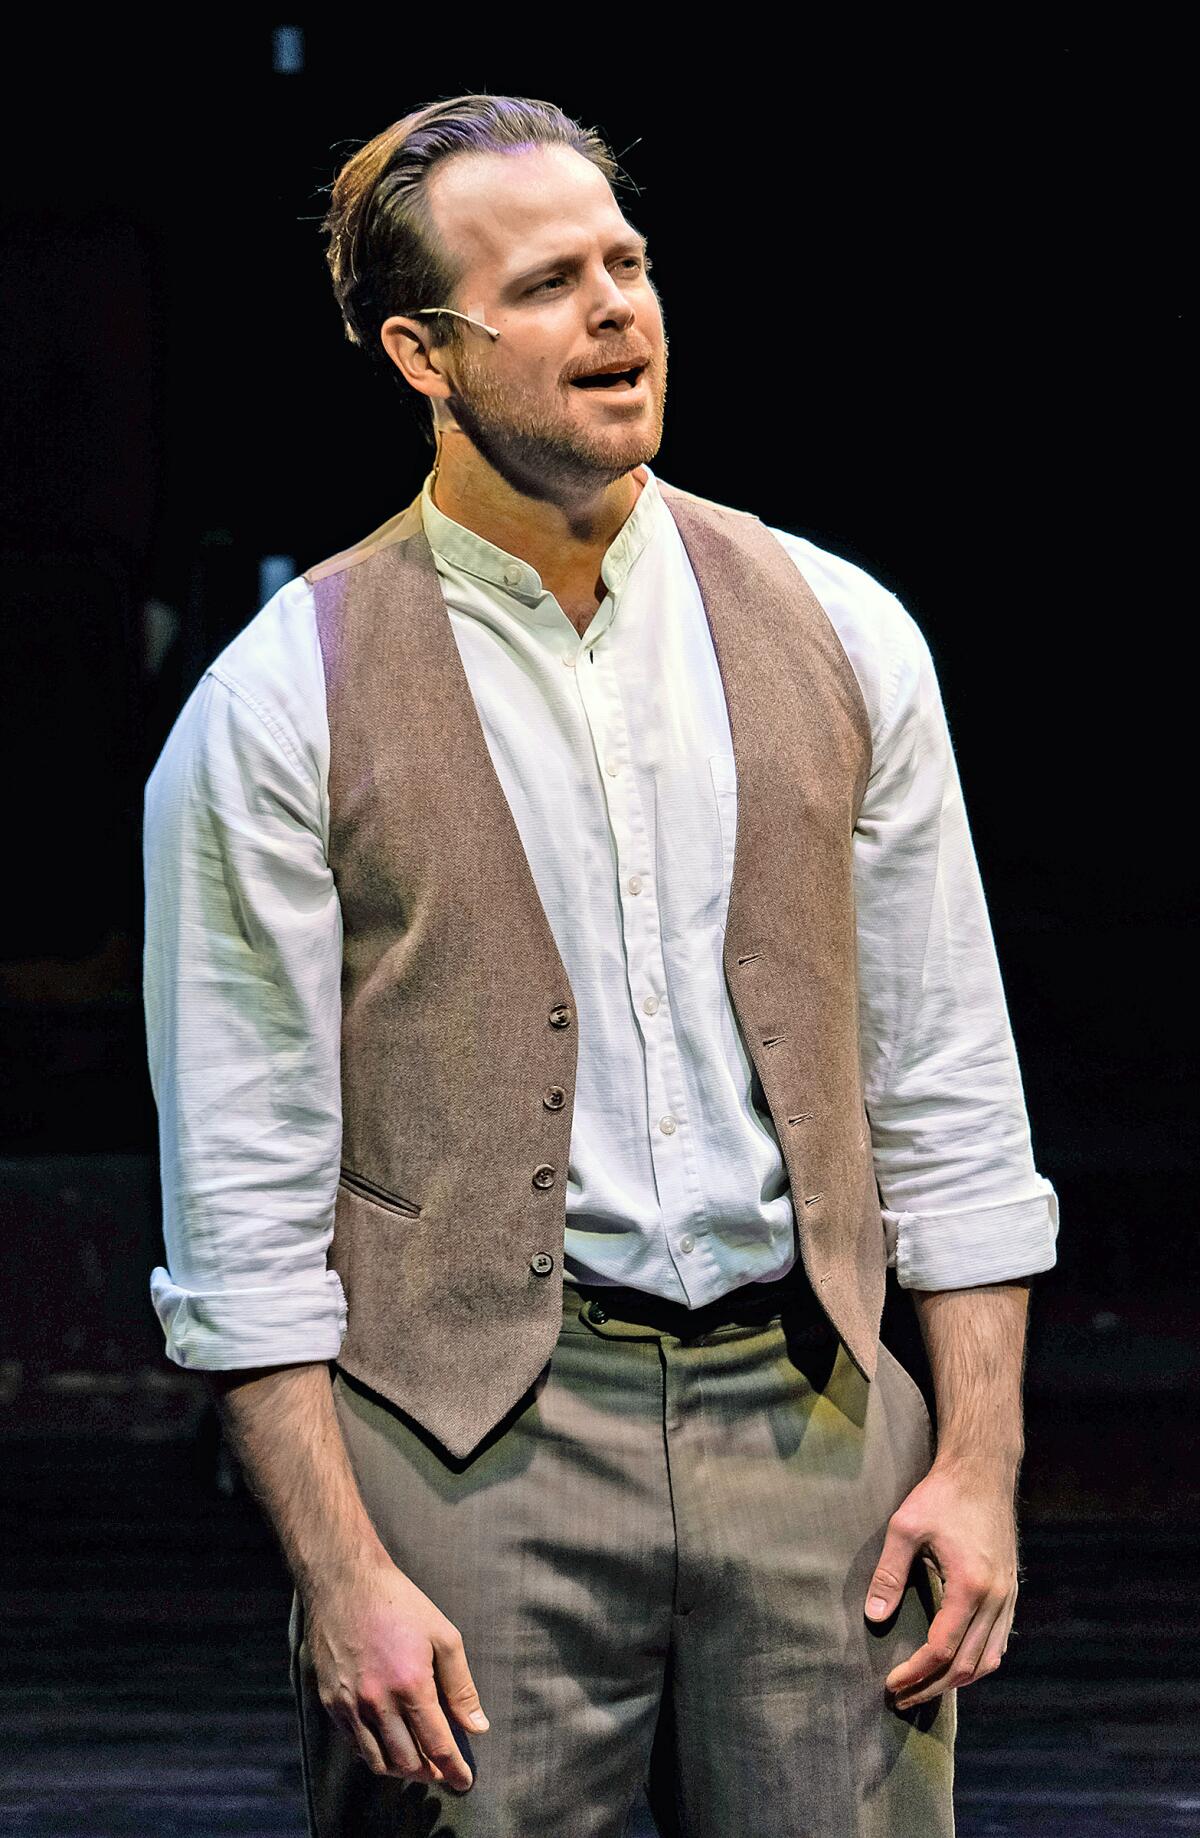 Jacob Reynolds as Billy sings the title song in “Bright Star”